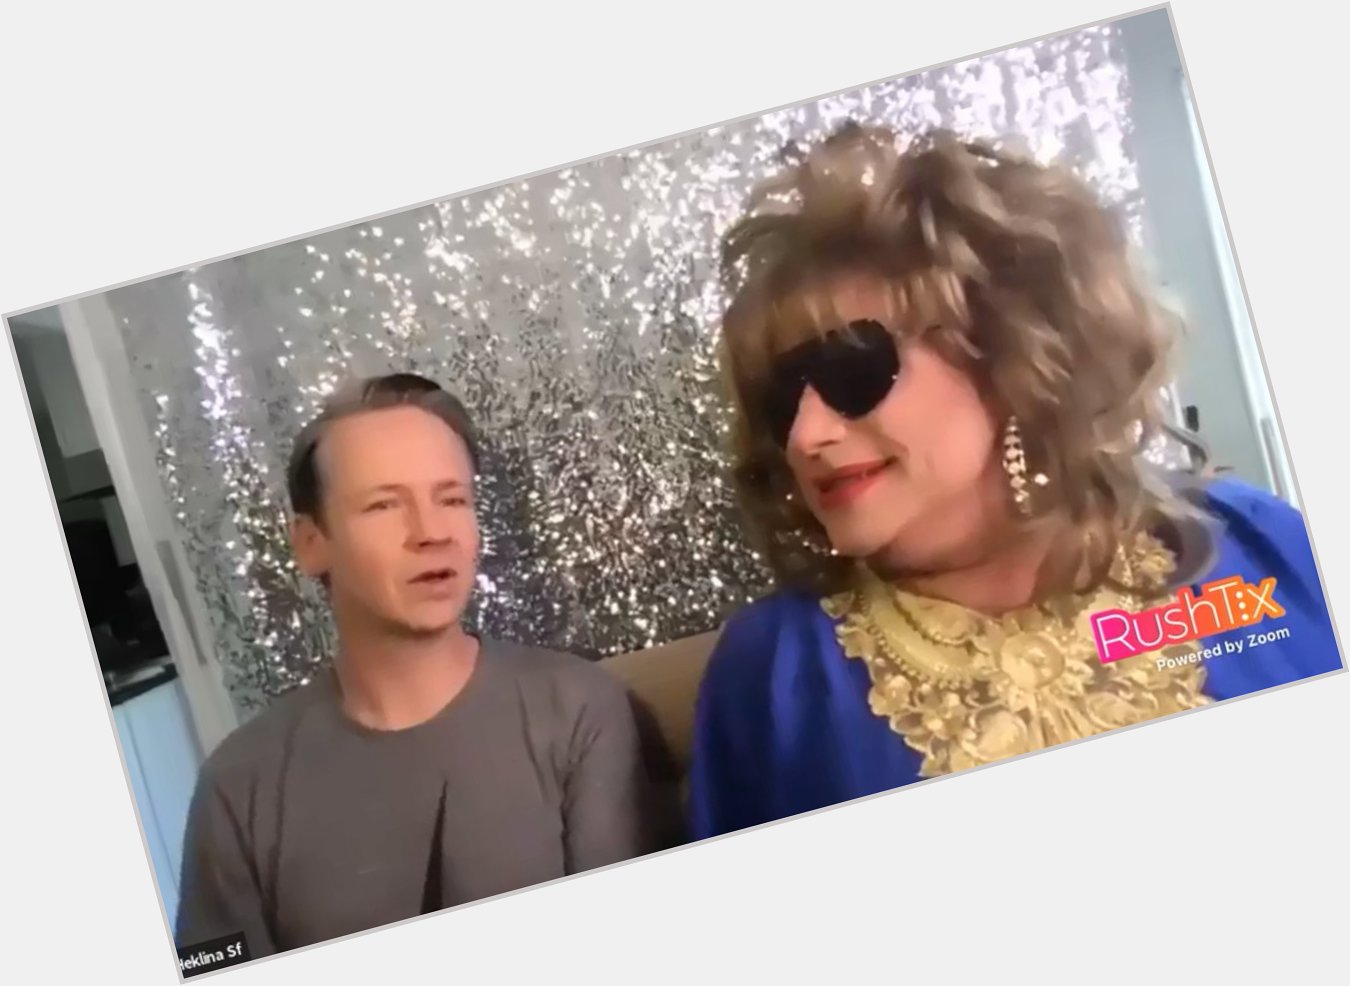 Happy birthday, John Cameron Mitchell! Sorry you have to spend it with that HAG !! 

Love ya, Heckles.  